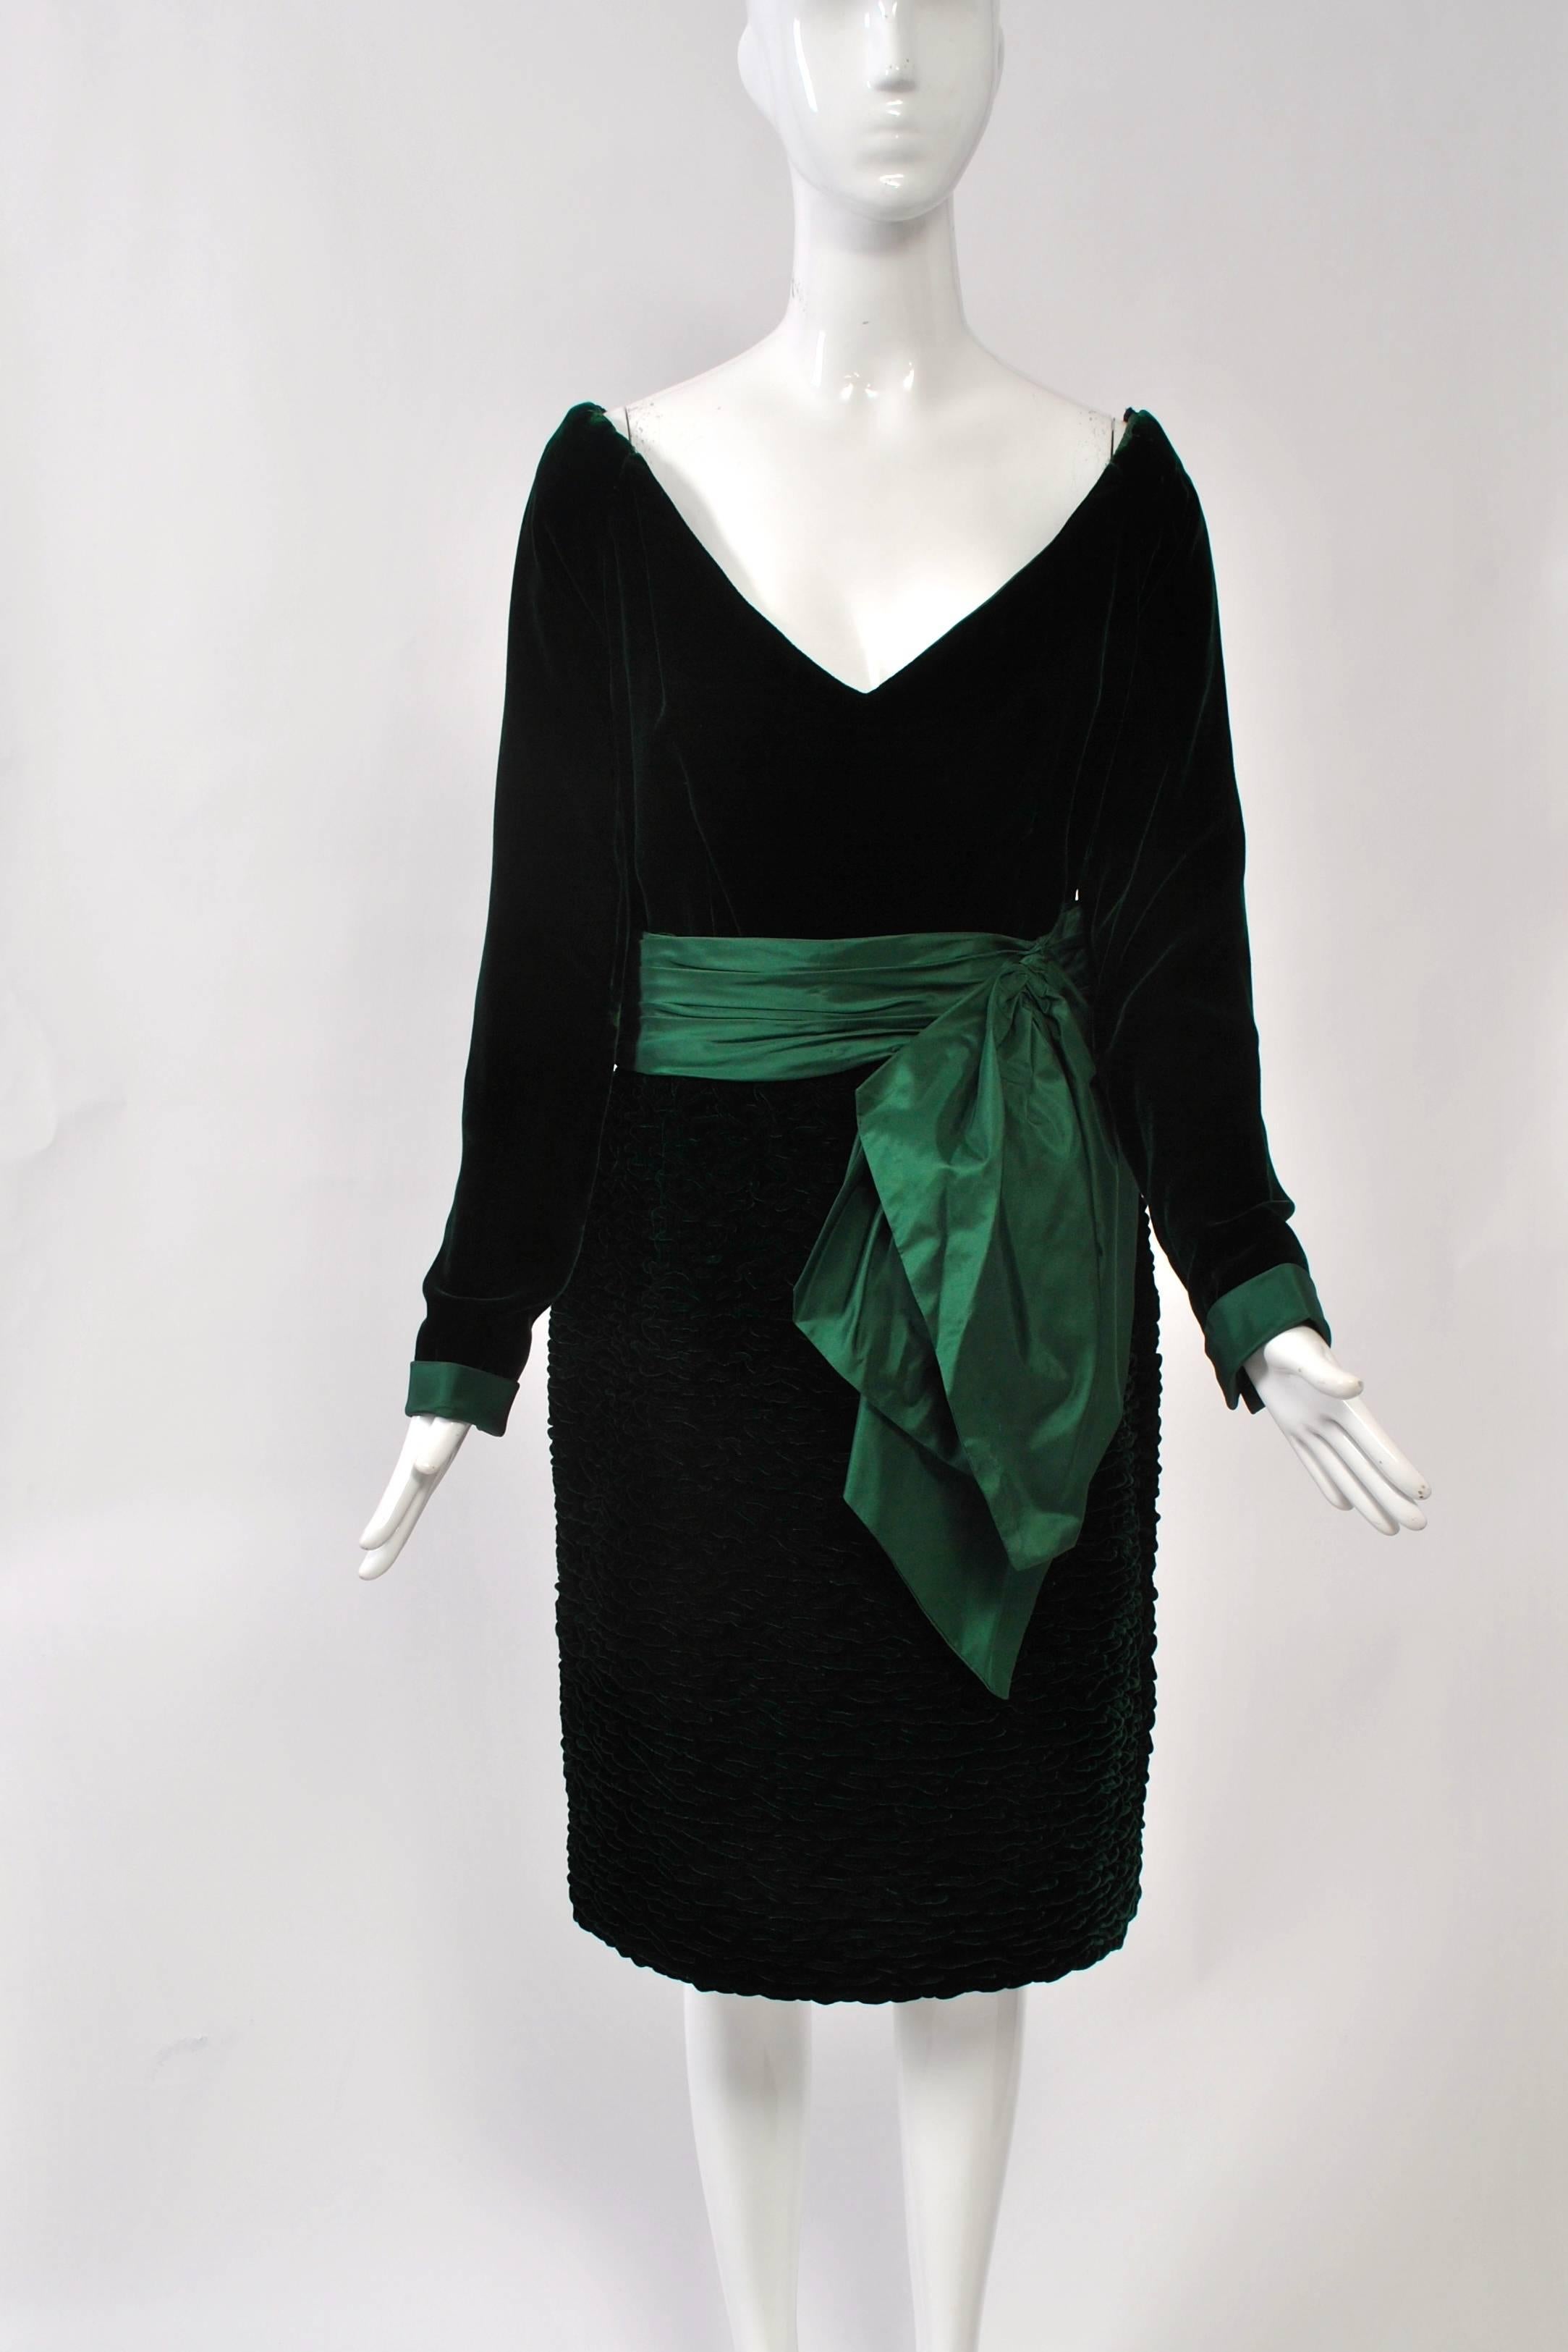 Forest green velvet dress by Oscar de la Renta featuring a deep V, off-the-shoulder neckline and puckered straight skirt. Elastic and lingerie straps help keep the shoulders in place and secure your bra straps. Back zipper. Lined. Size M.